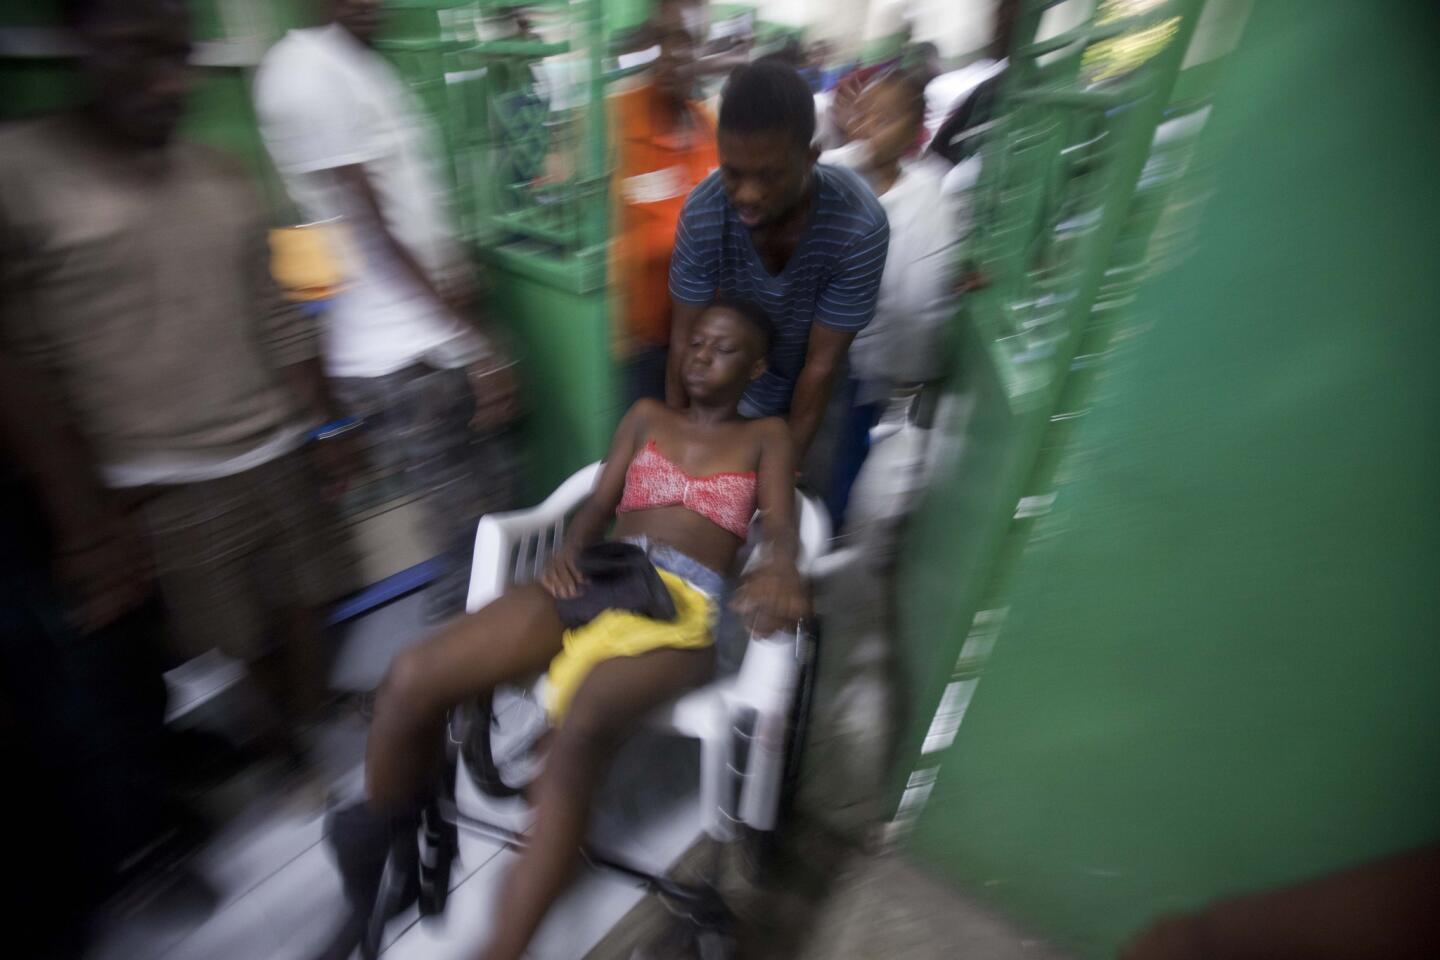 A reveler who was injured during carnival celebrations waits for treatment at the emergency room of the General Hospital in Port-au-Prince, Haiti, on Feb. 17.